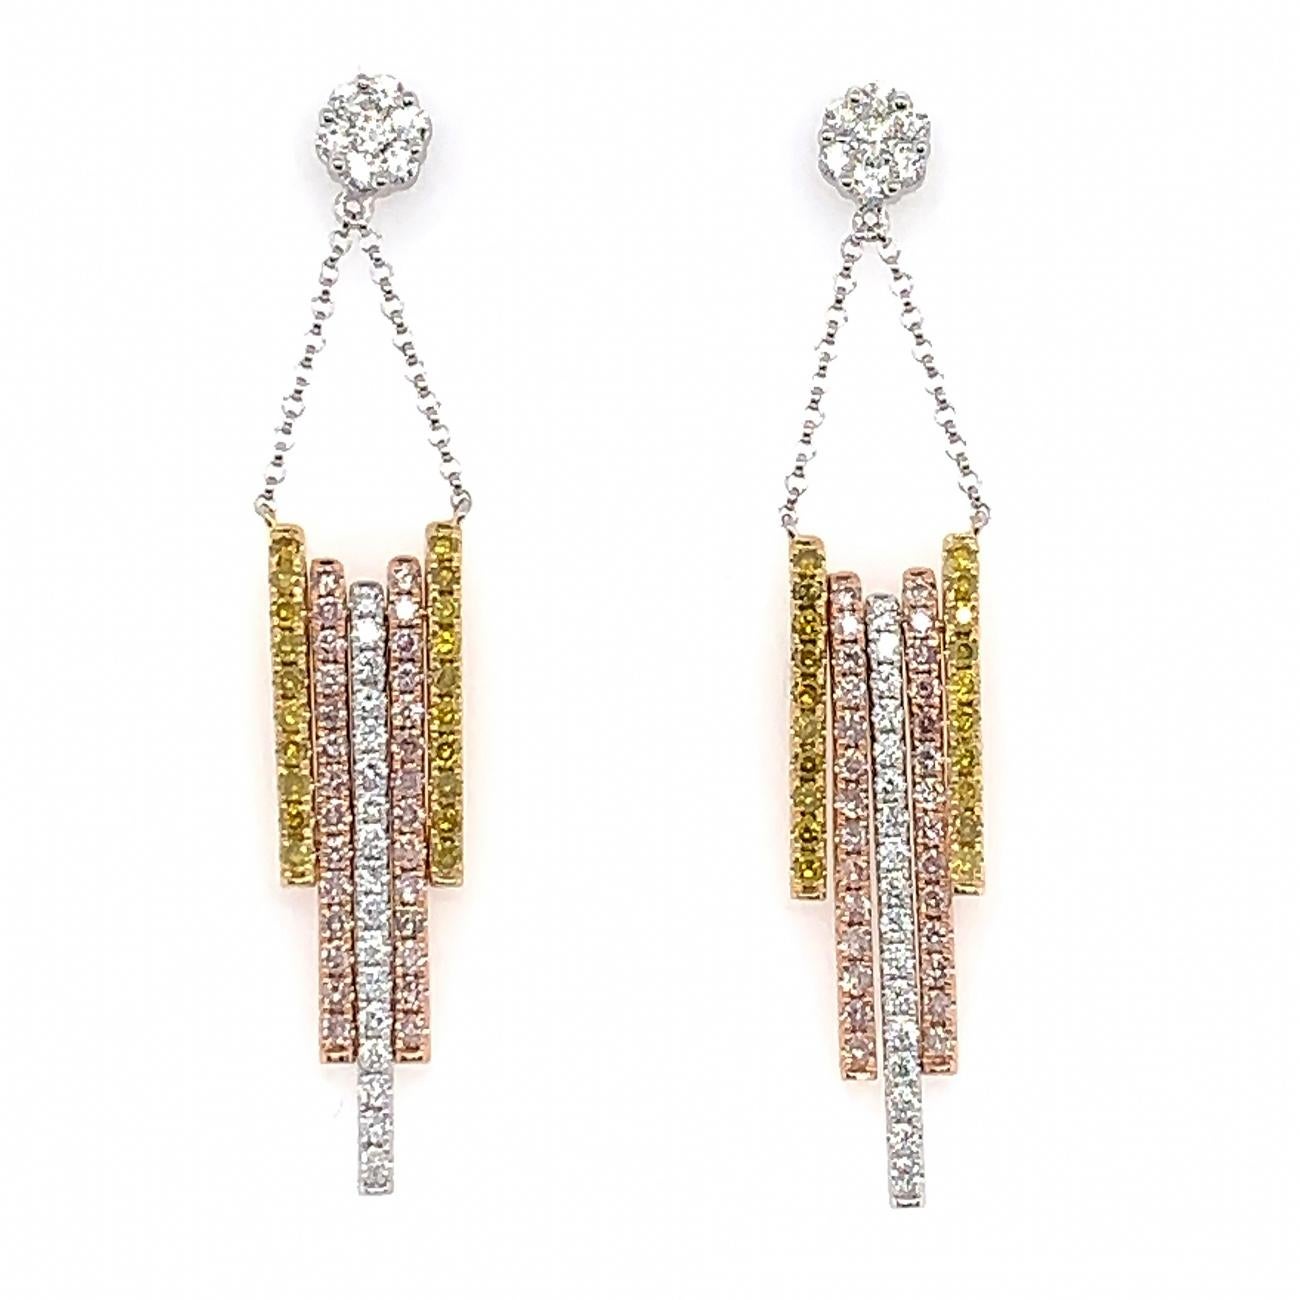 The Following Items we are offering is a Rare Important Radiant 18KT Gold Glamorous and Elaborate Rare Magnificent Glittering Pink Diamond, Gold Diamond, and White Diamond, Fringe Design Earrings. Earrings feature Rare Sparkling Fine Glittering